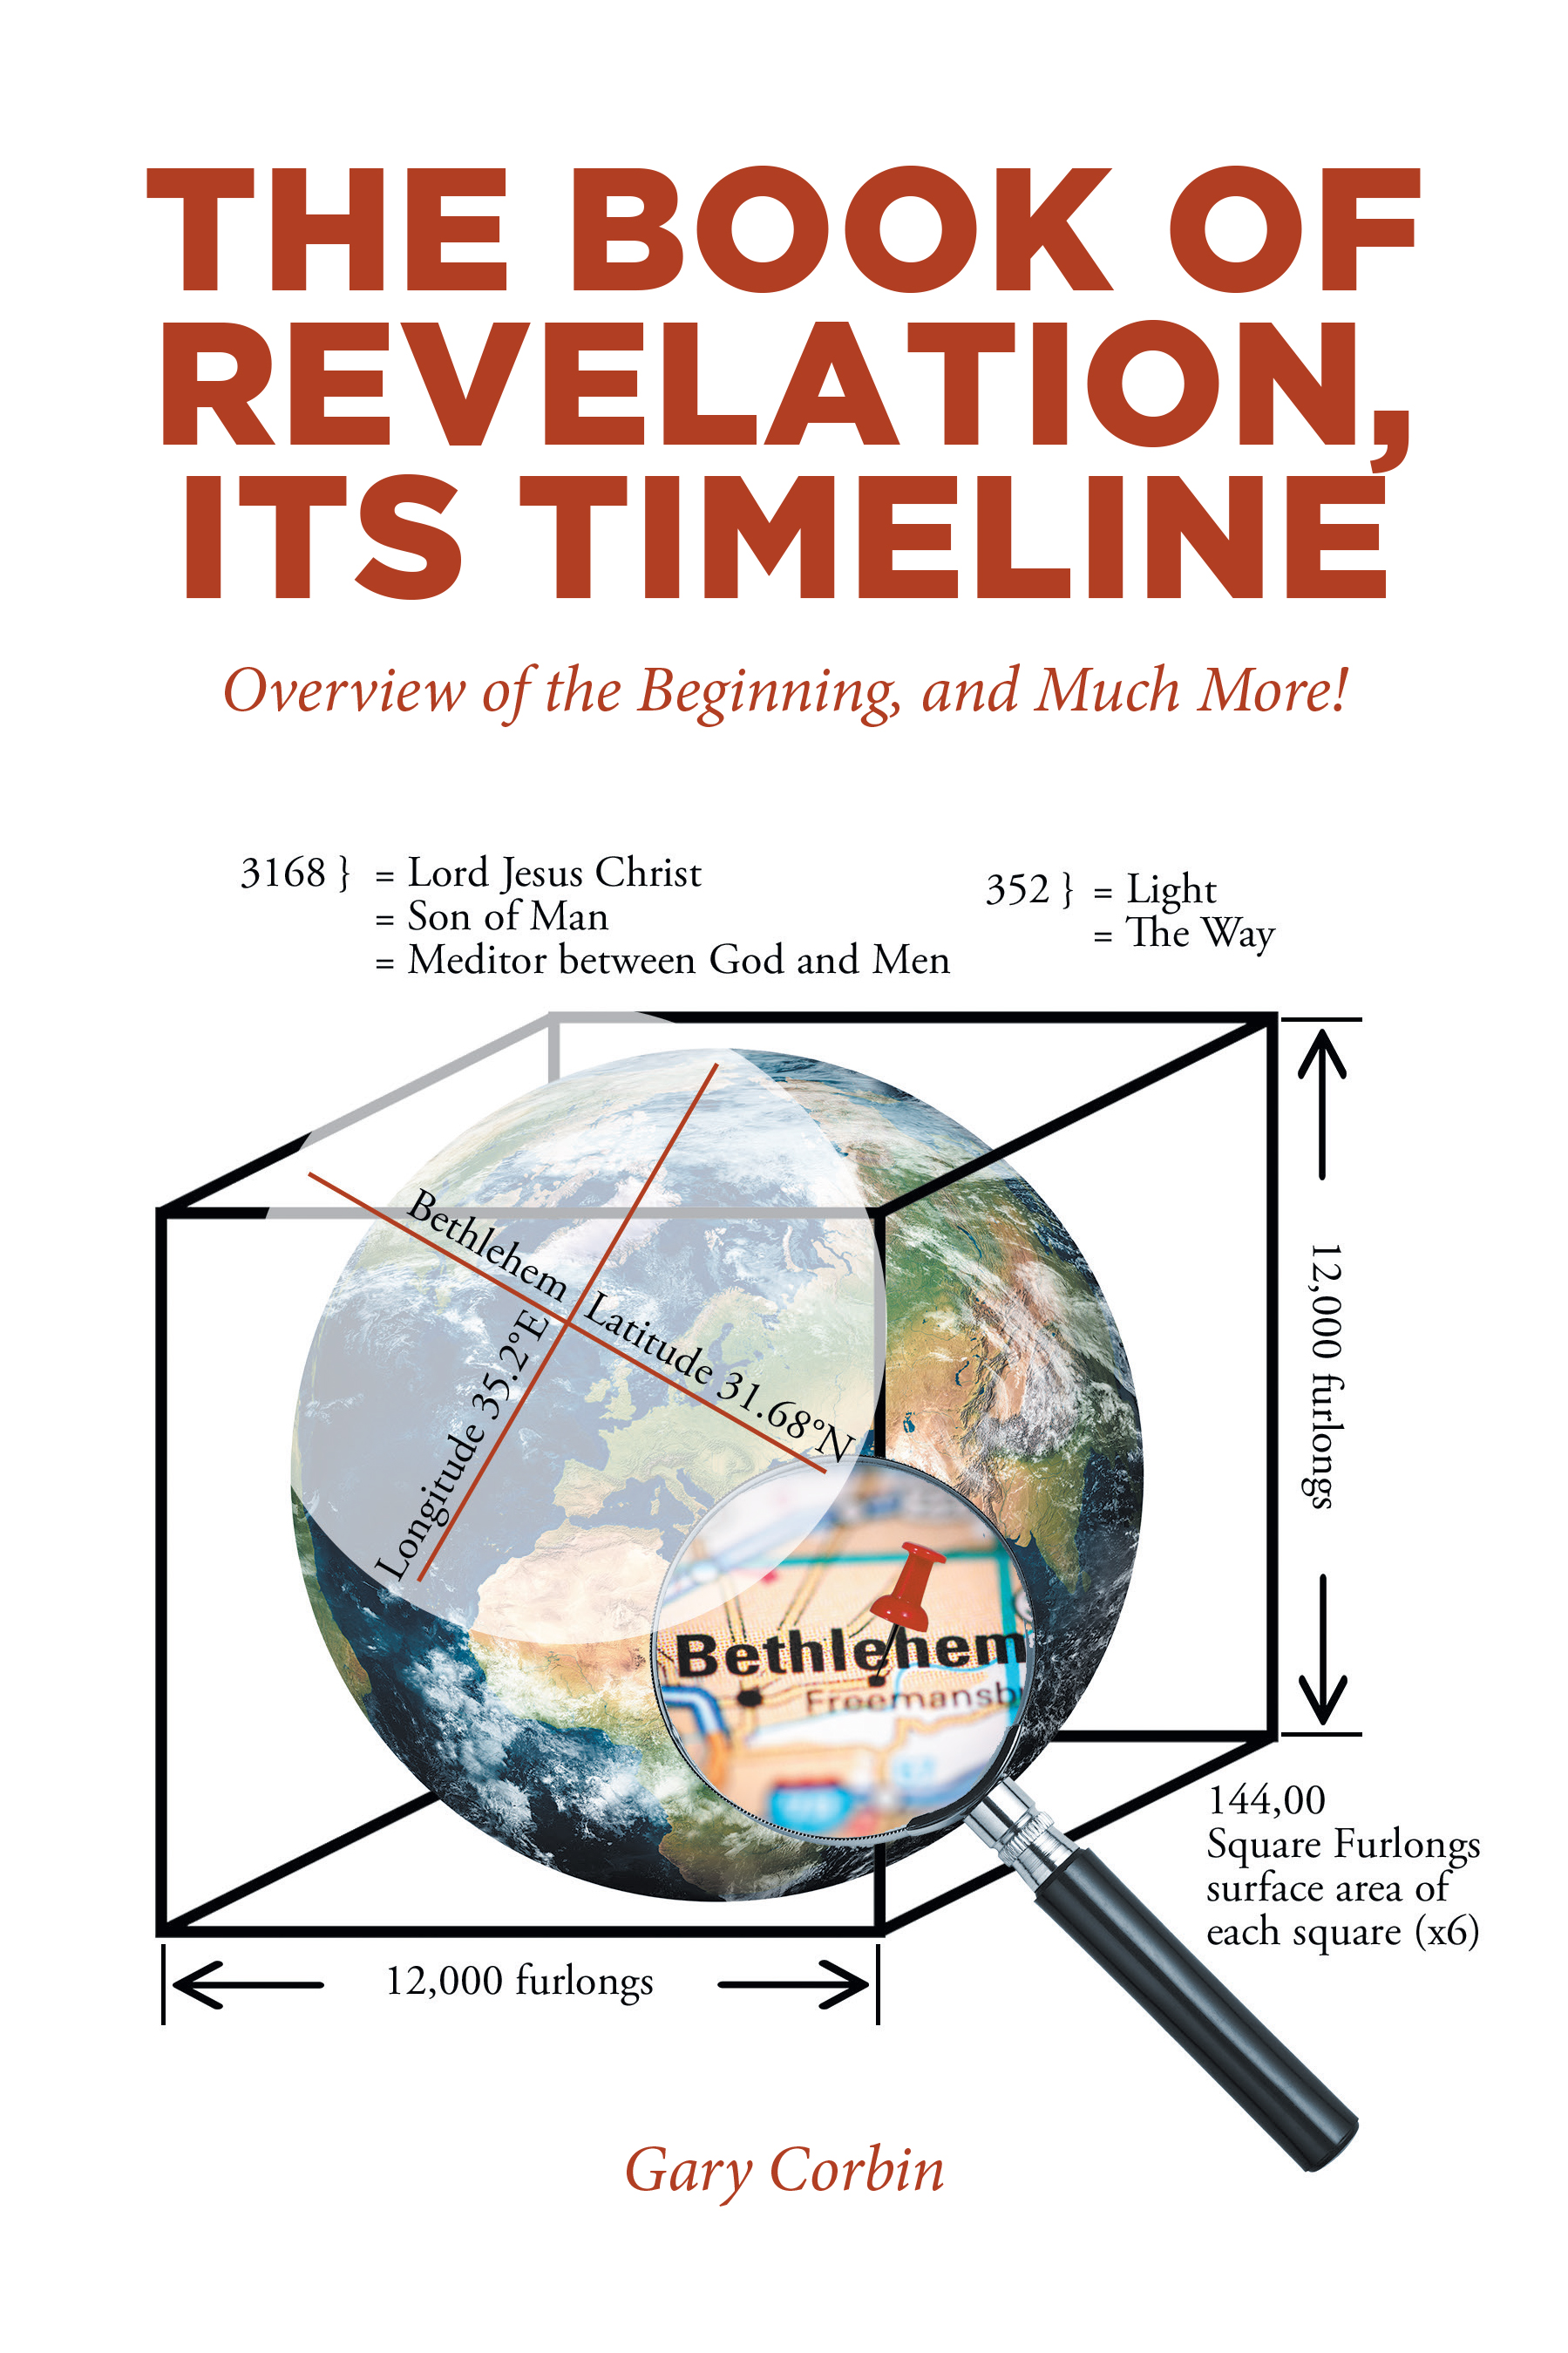 Gary Corbin’s Newly Released “The Book of Revelation, Its Timeline: Overview of the Beginning, and Much More!” Unveils Intriguing Insights Into Biblical Prophecy